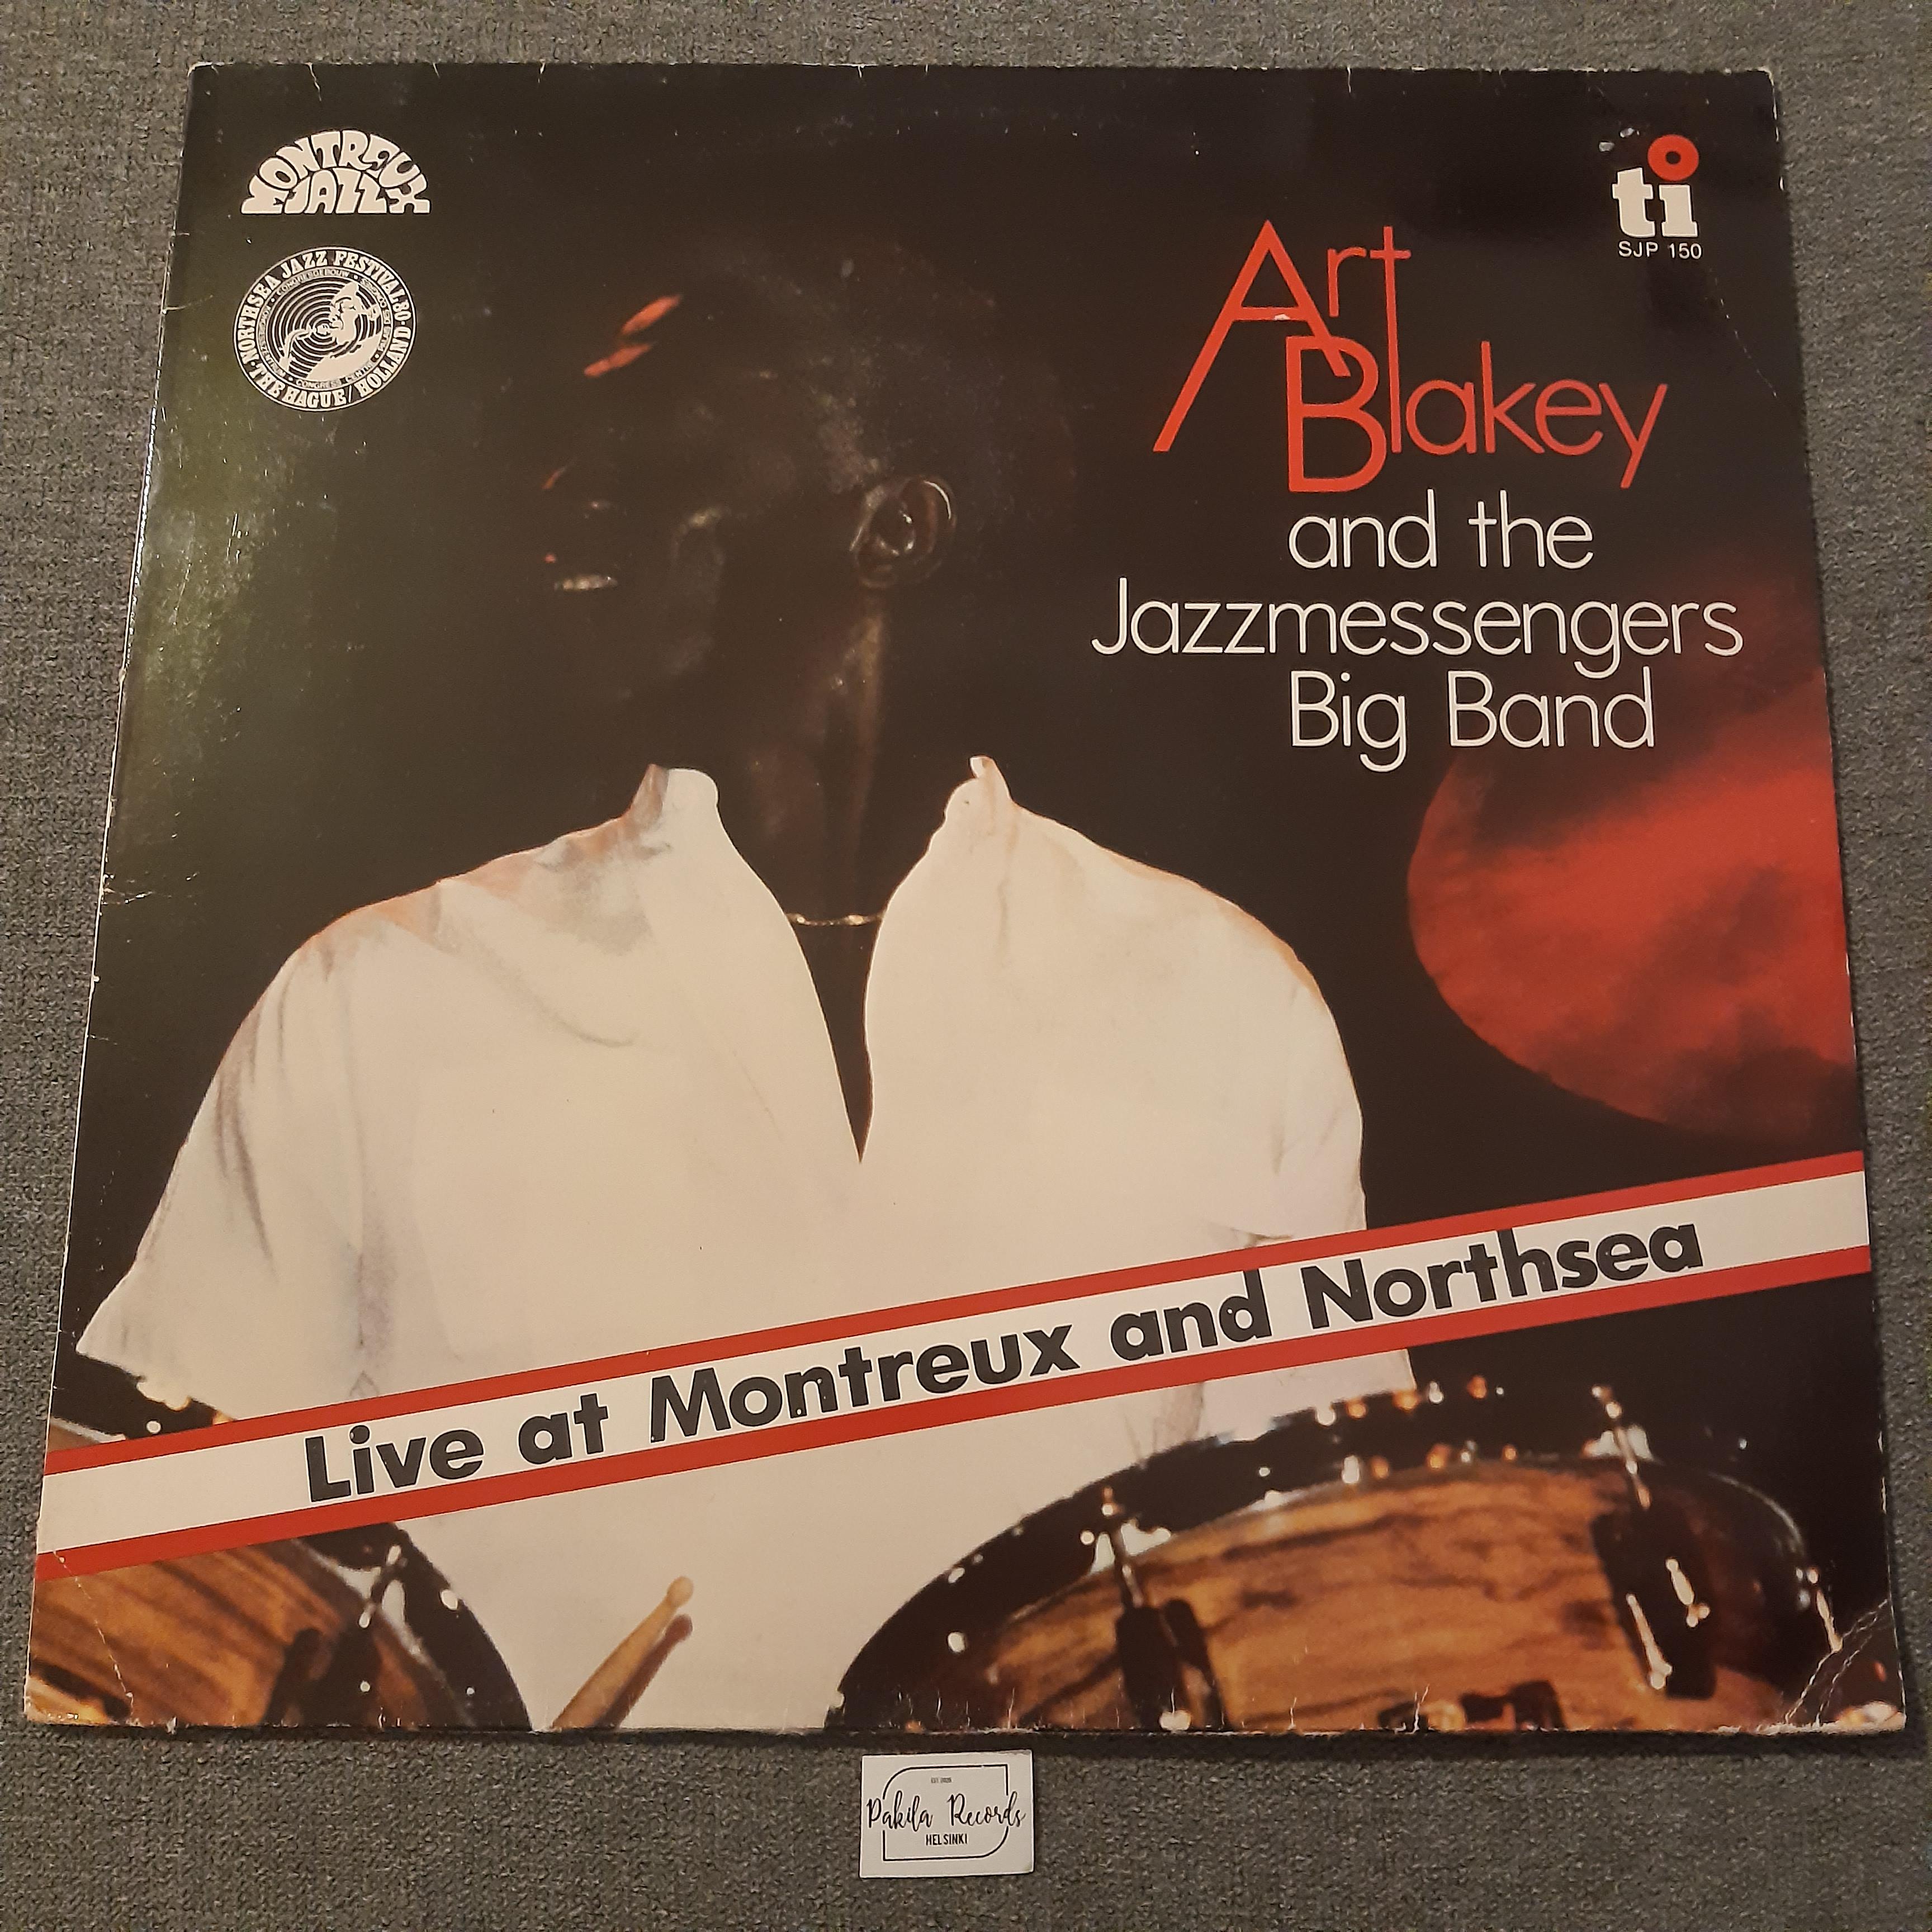 Art Blakey & The Jazzmessengers Big Band - Live At Montreux And Northsea - LP (käytetty)